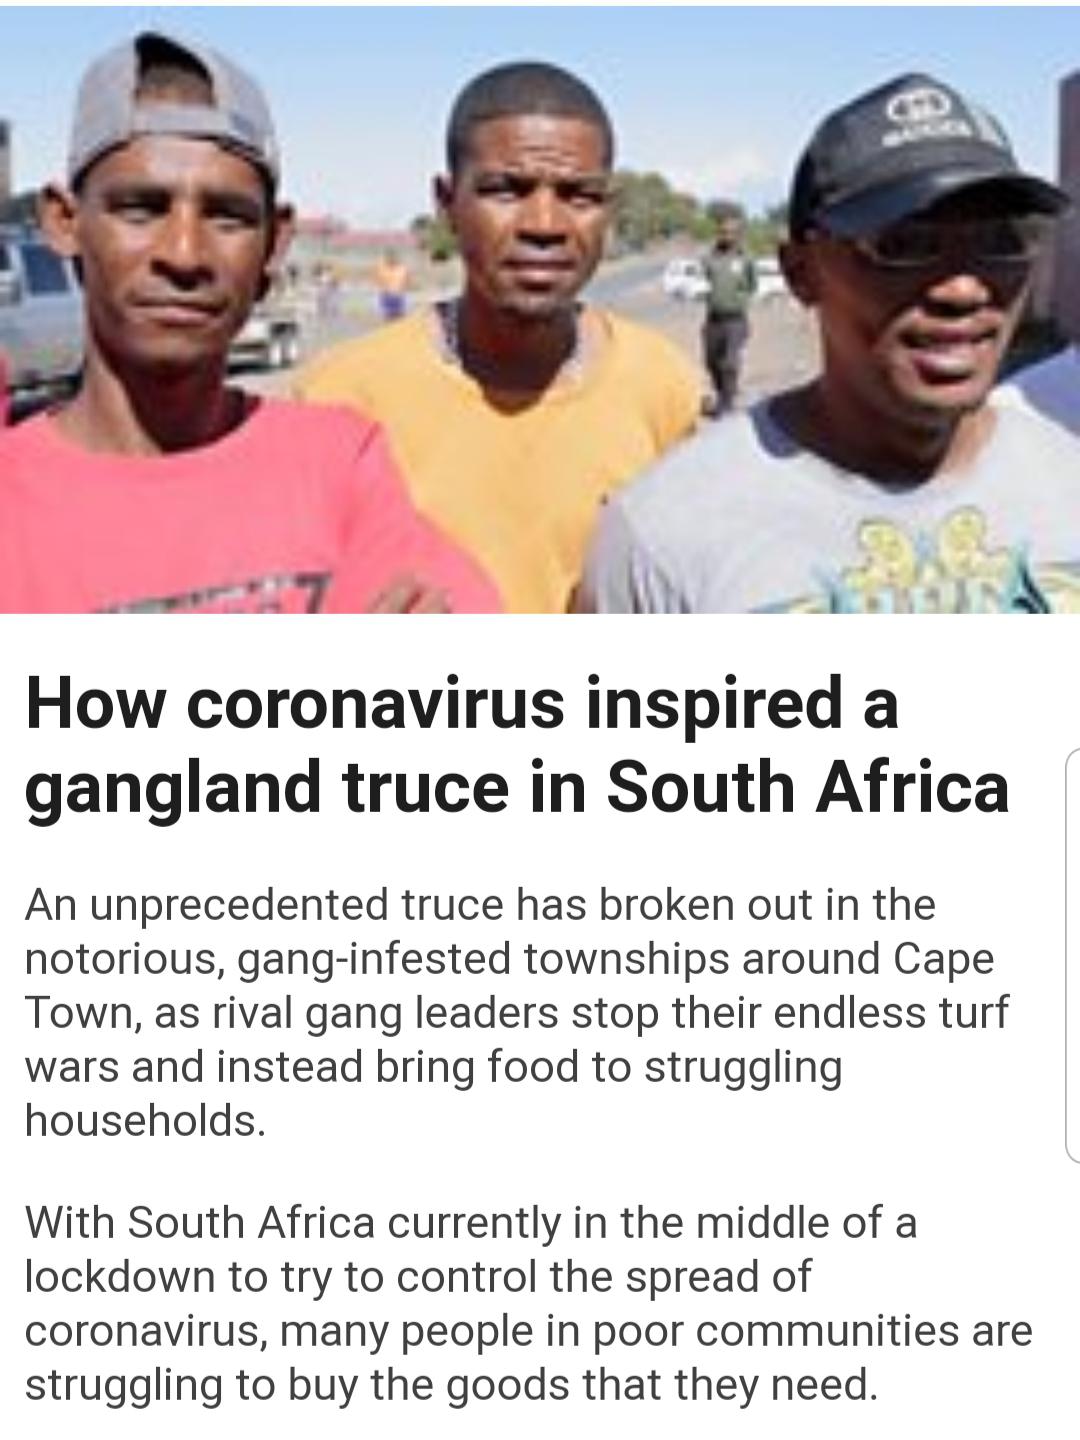 male - How coronavirus inspired a gangland truce in South Africa An unprecedented truce has broken out in the notorious, ganginfested townships around Cape Town, as rival gang leaders stop their endless turf wars and instead bring food to struggling house